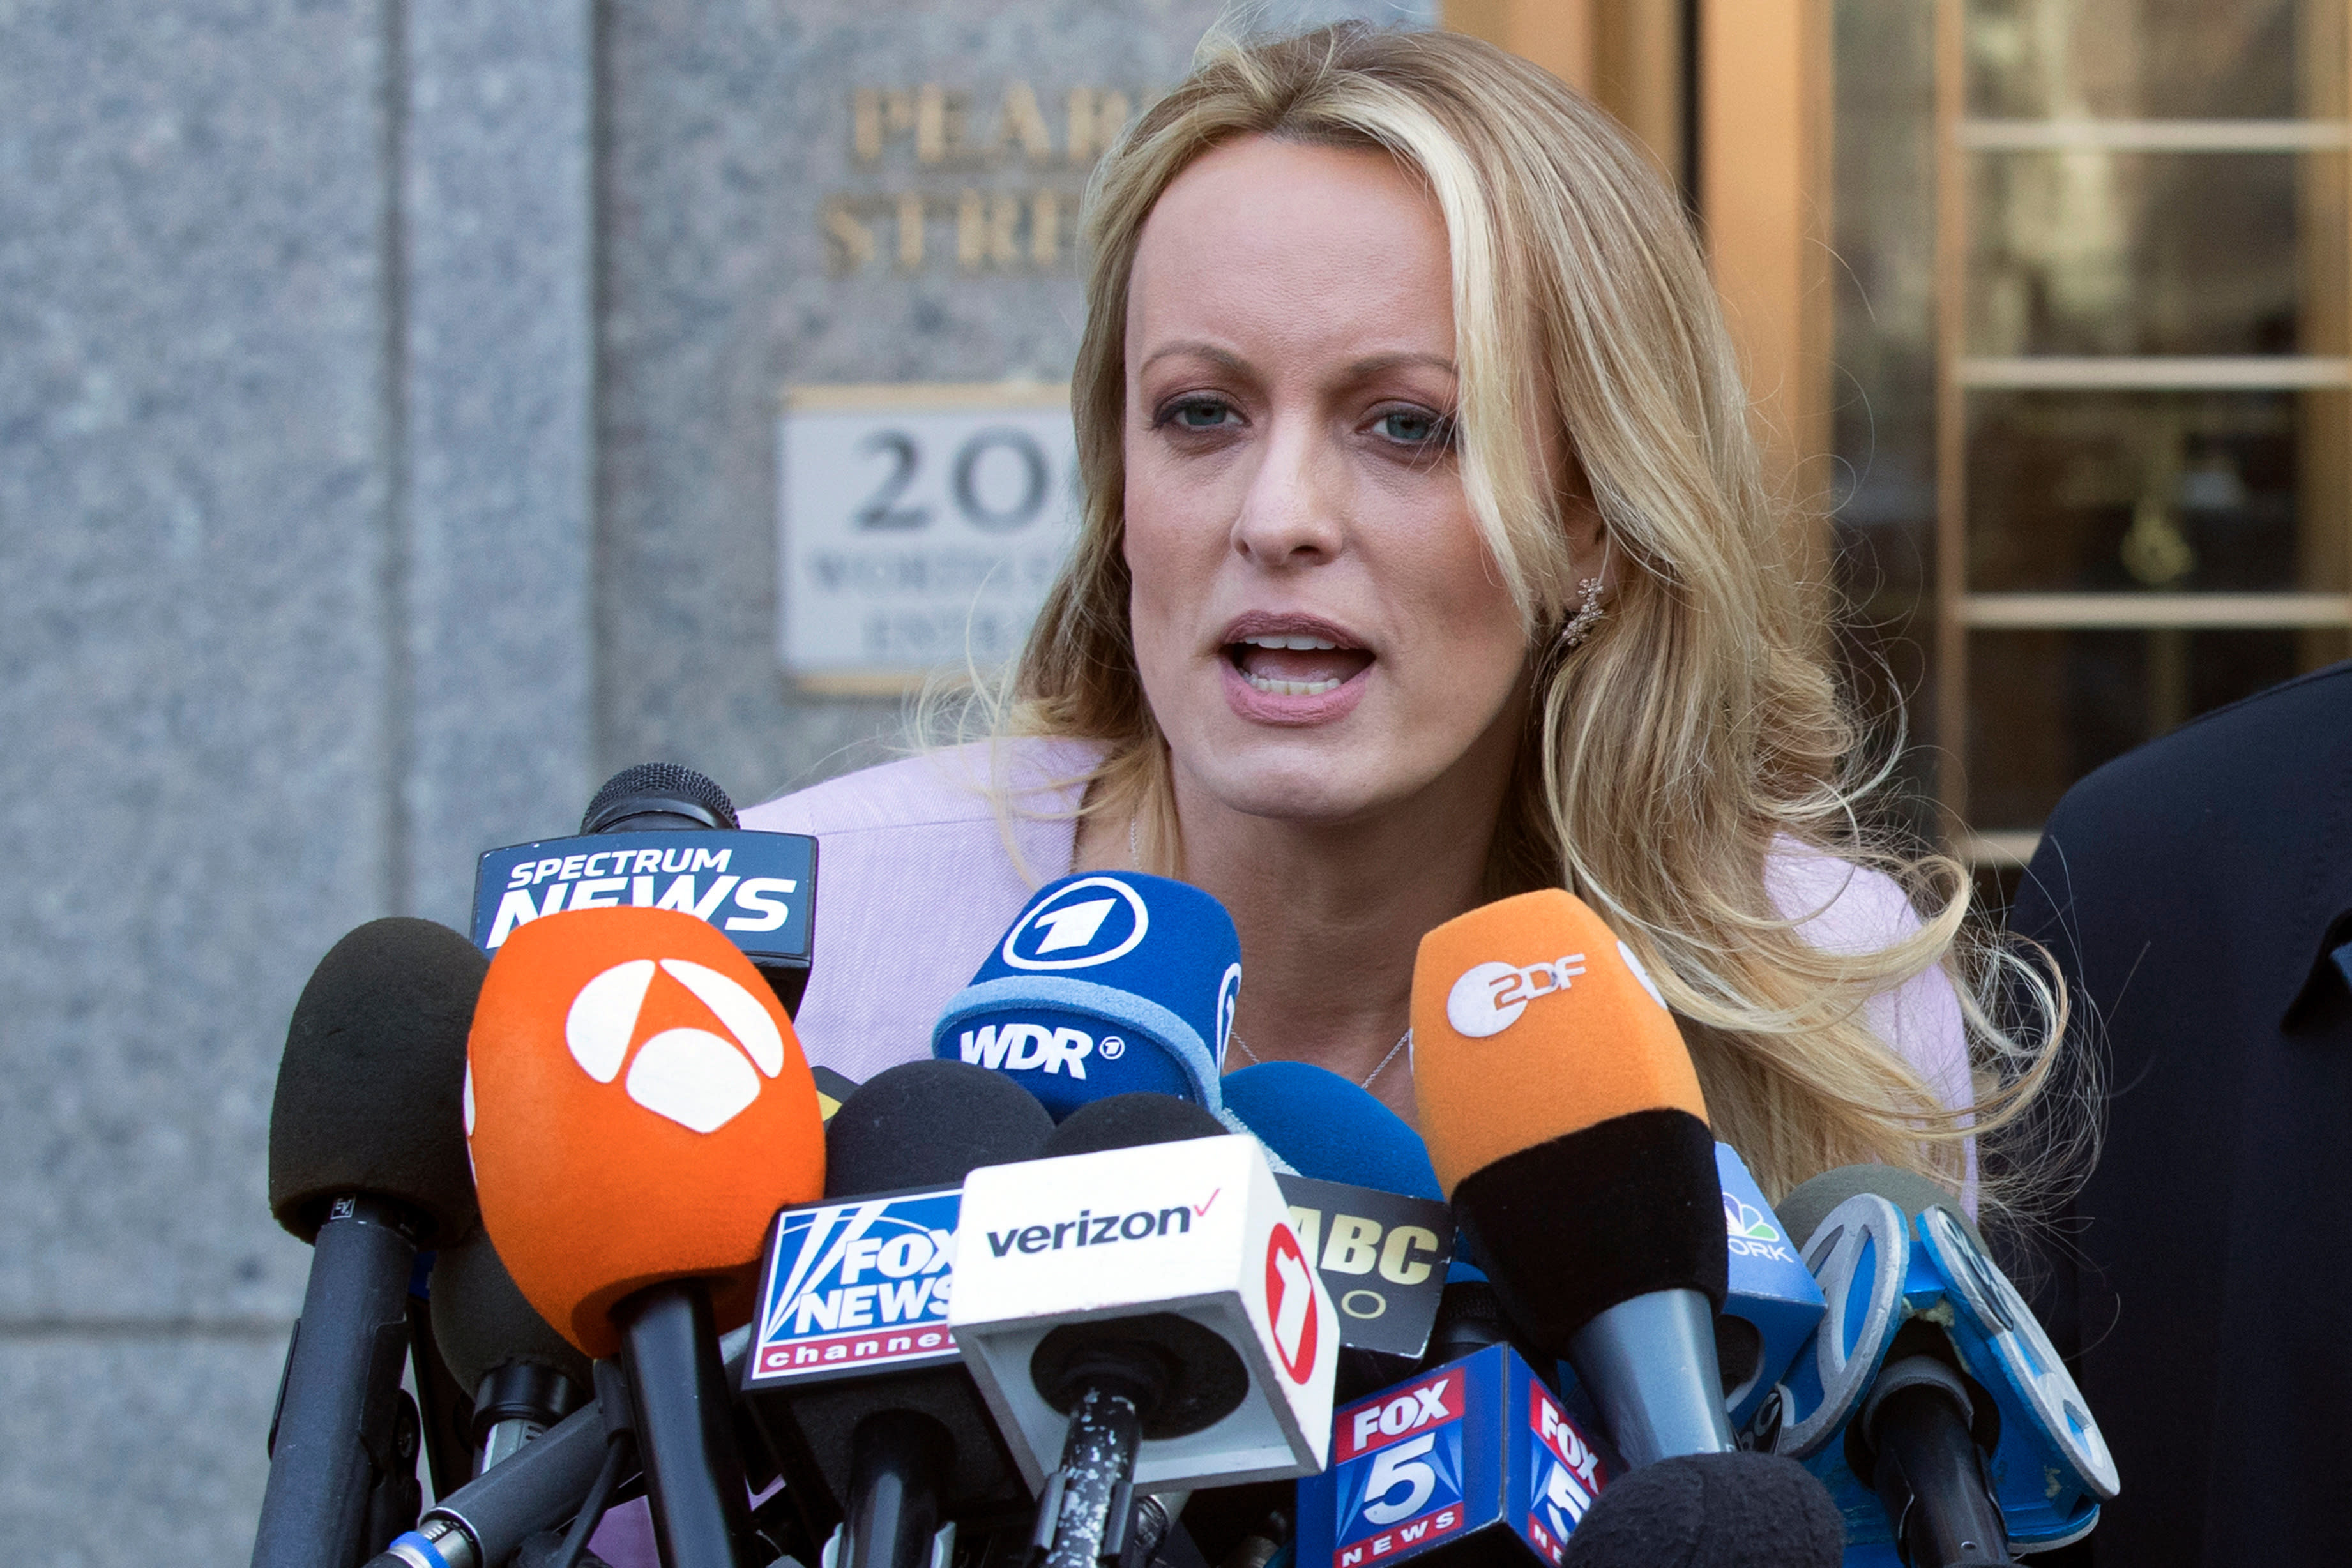 Police Arrest Porn - Police in probe that led to Stormy Daniels arrest charged